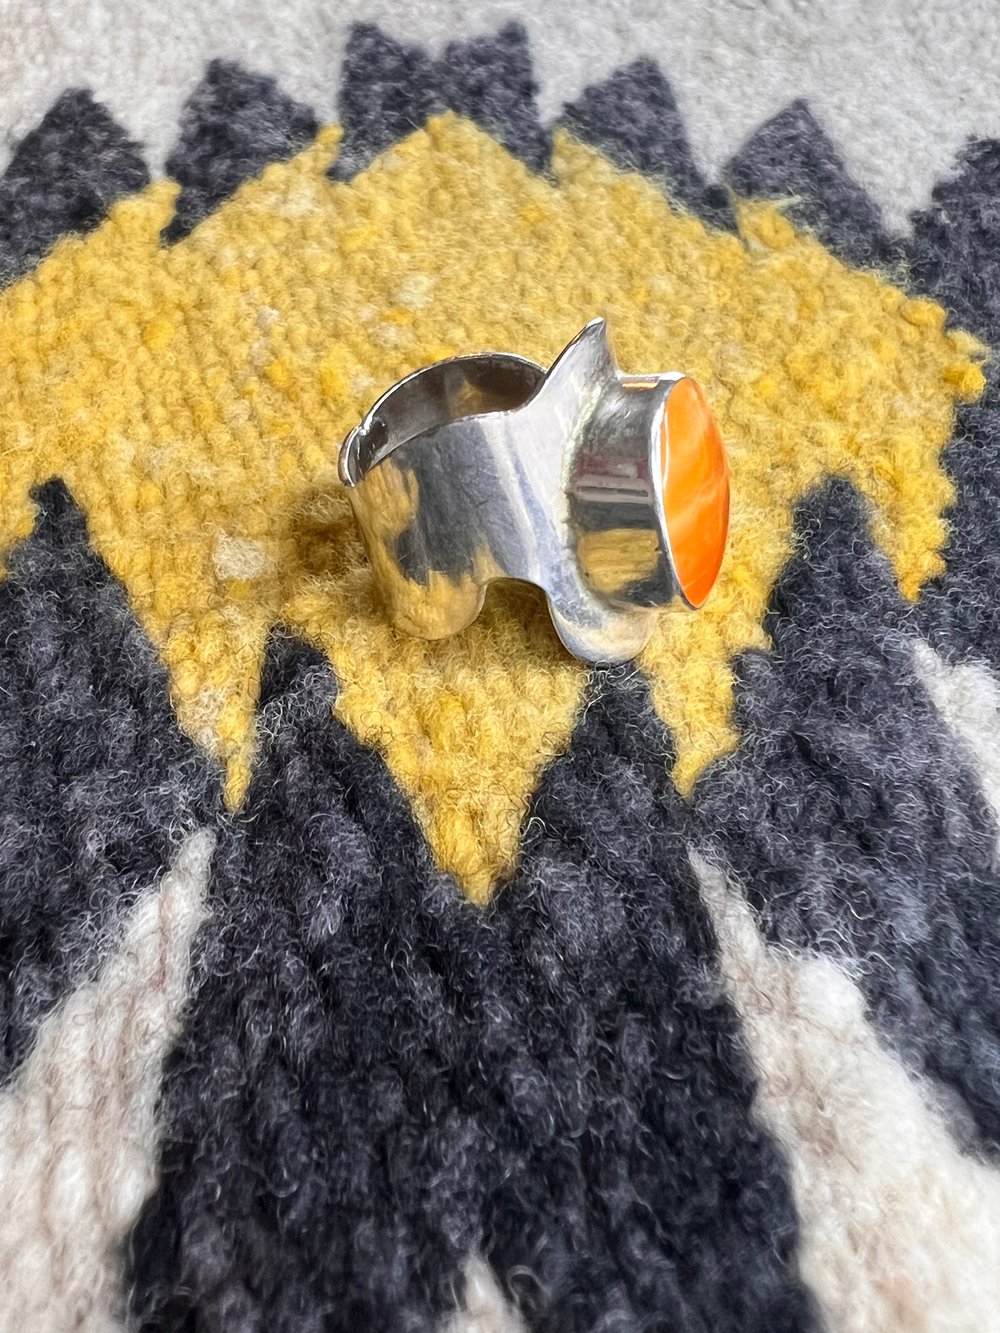 Abstract Sterling with Orange Aventurine Ring (7.25)